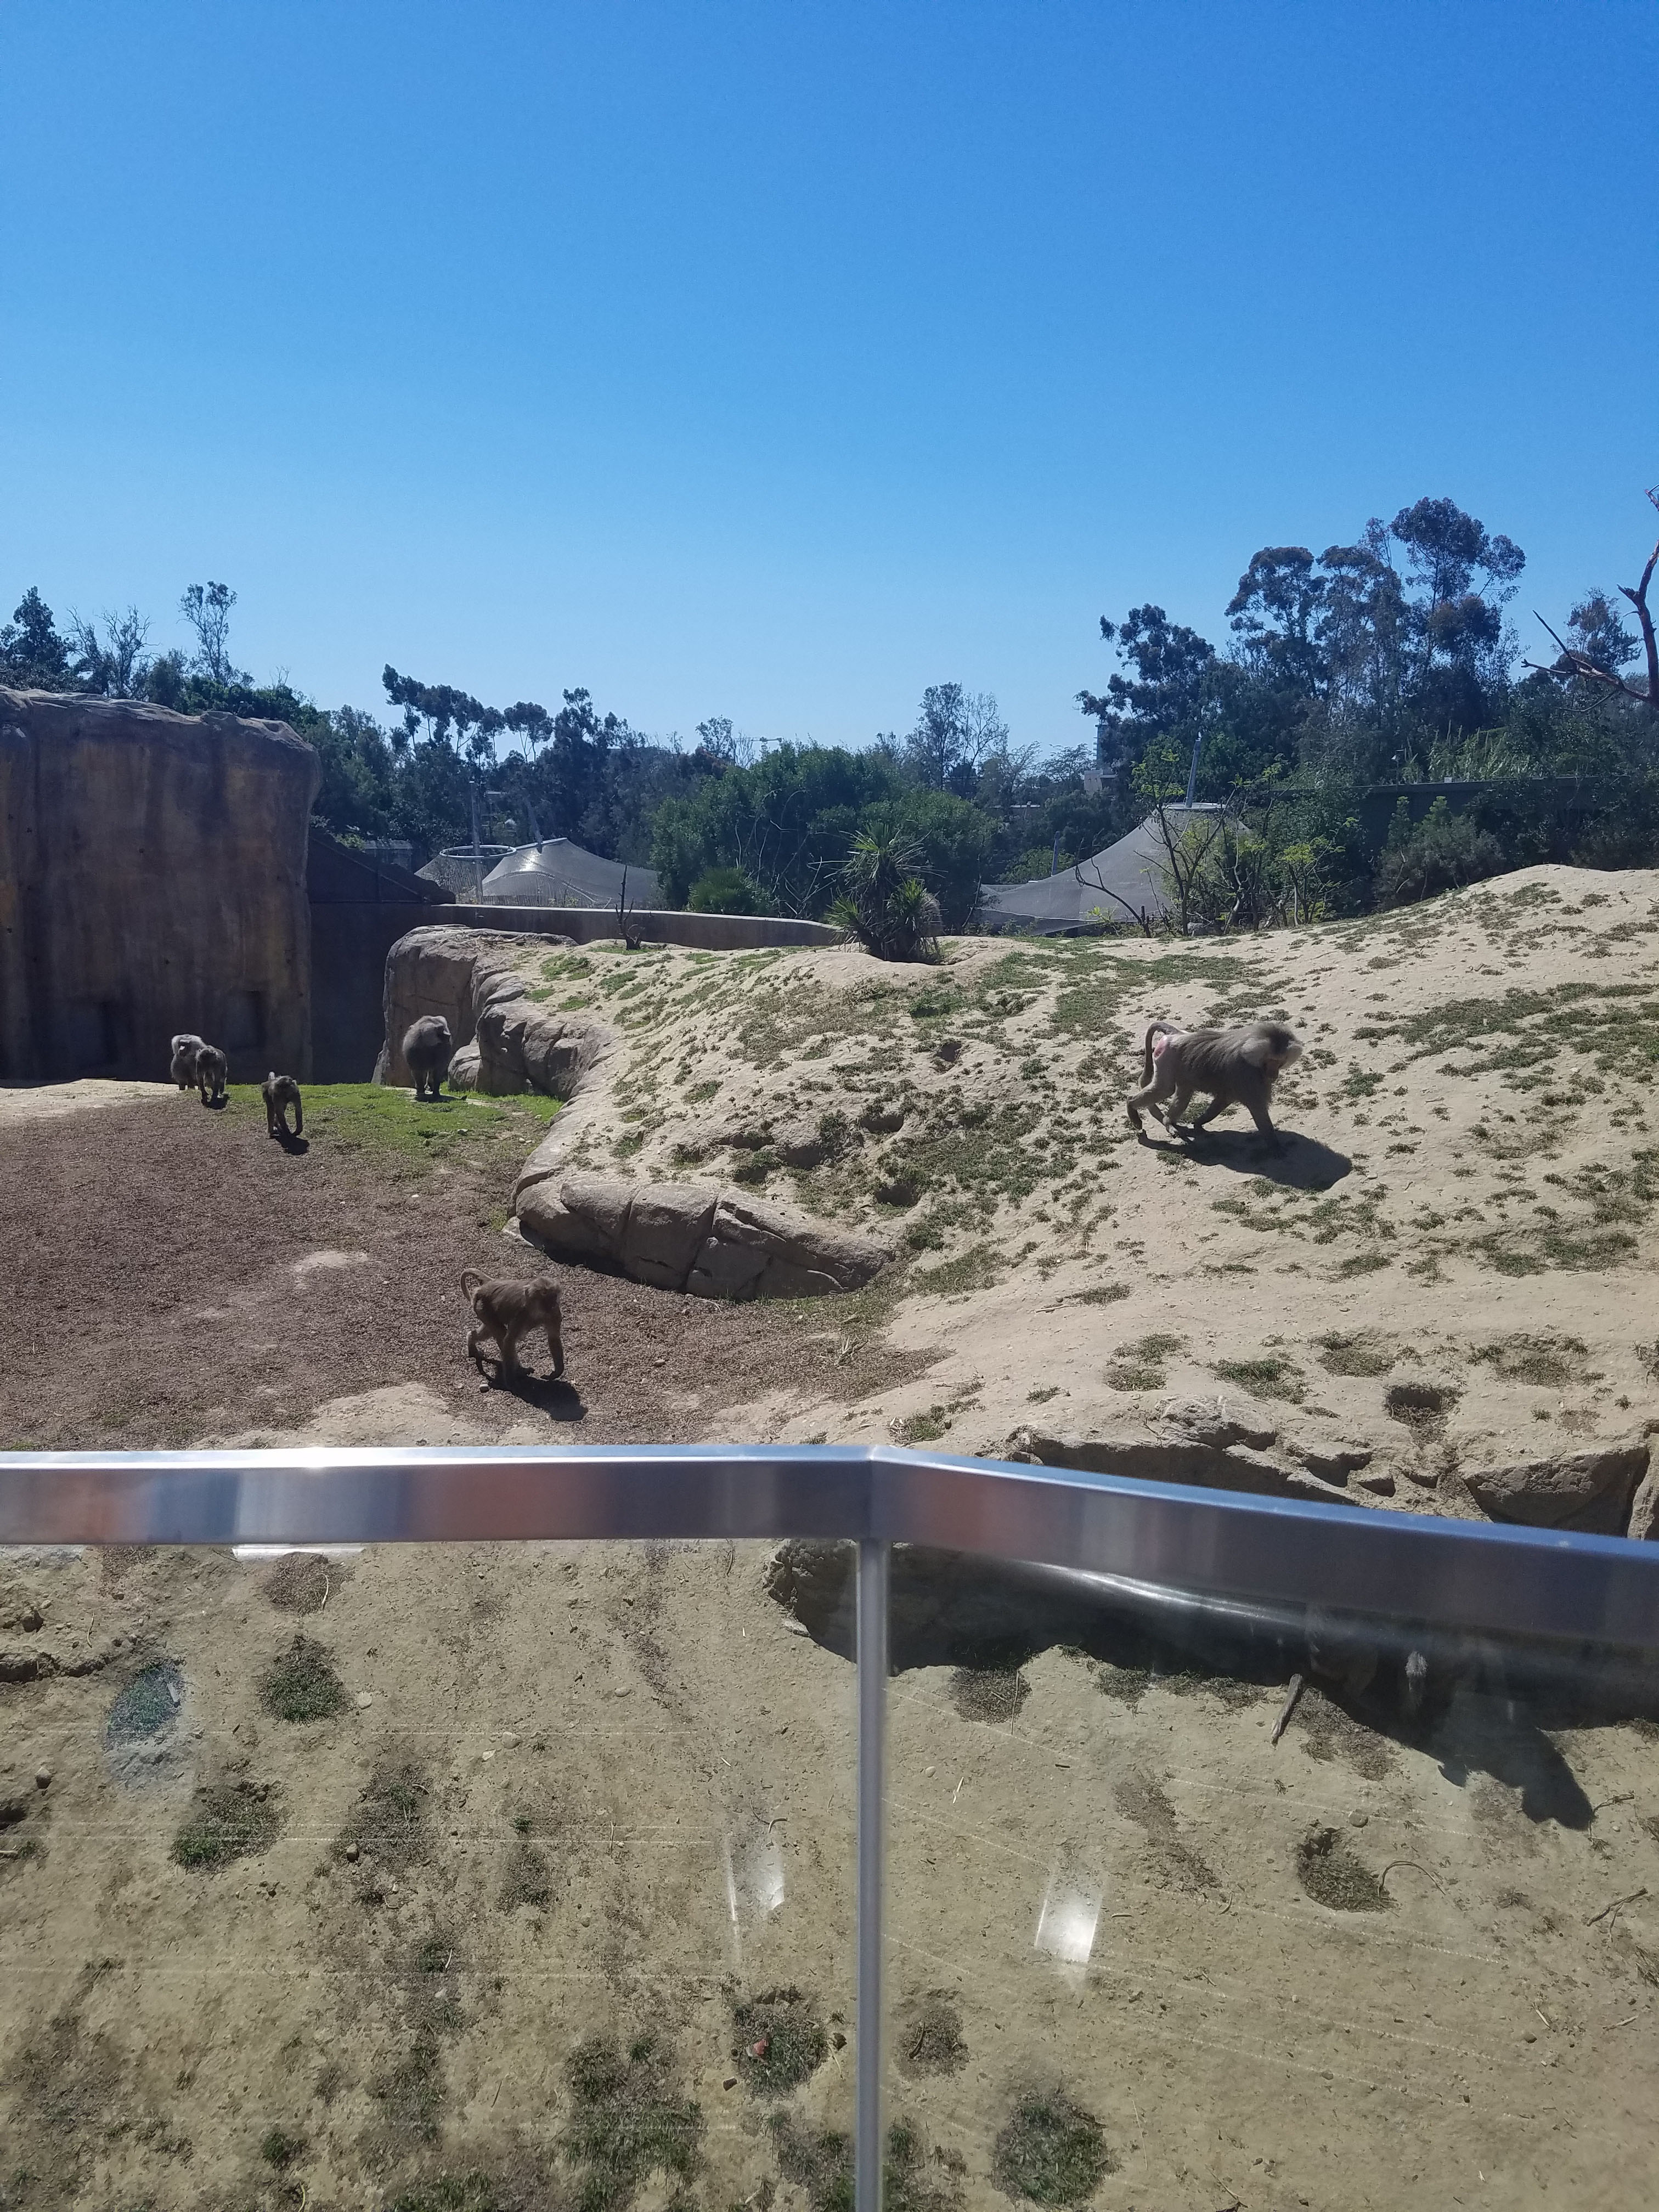 Africa Rocks at the San Diego Zoo